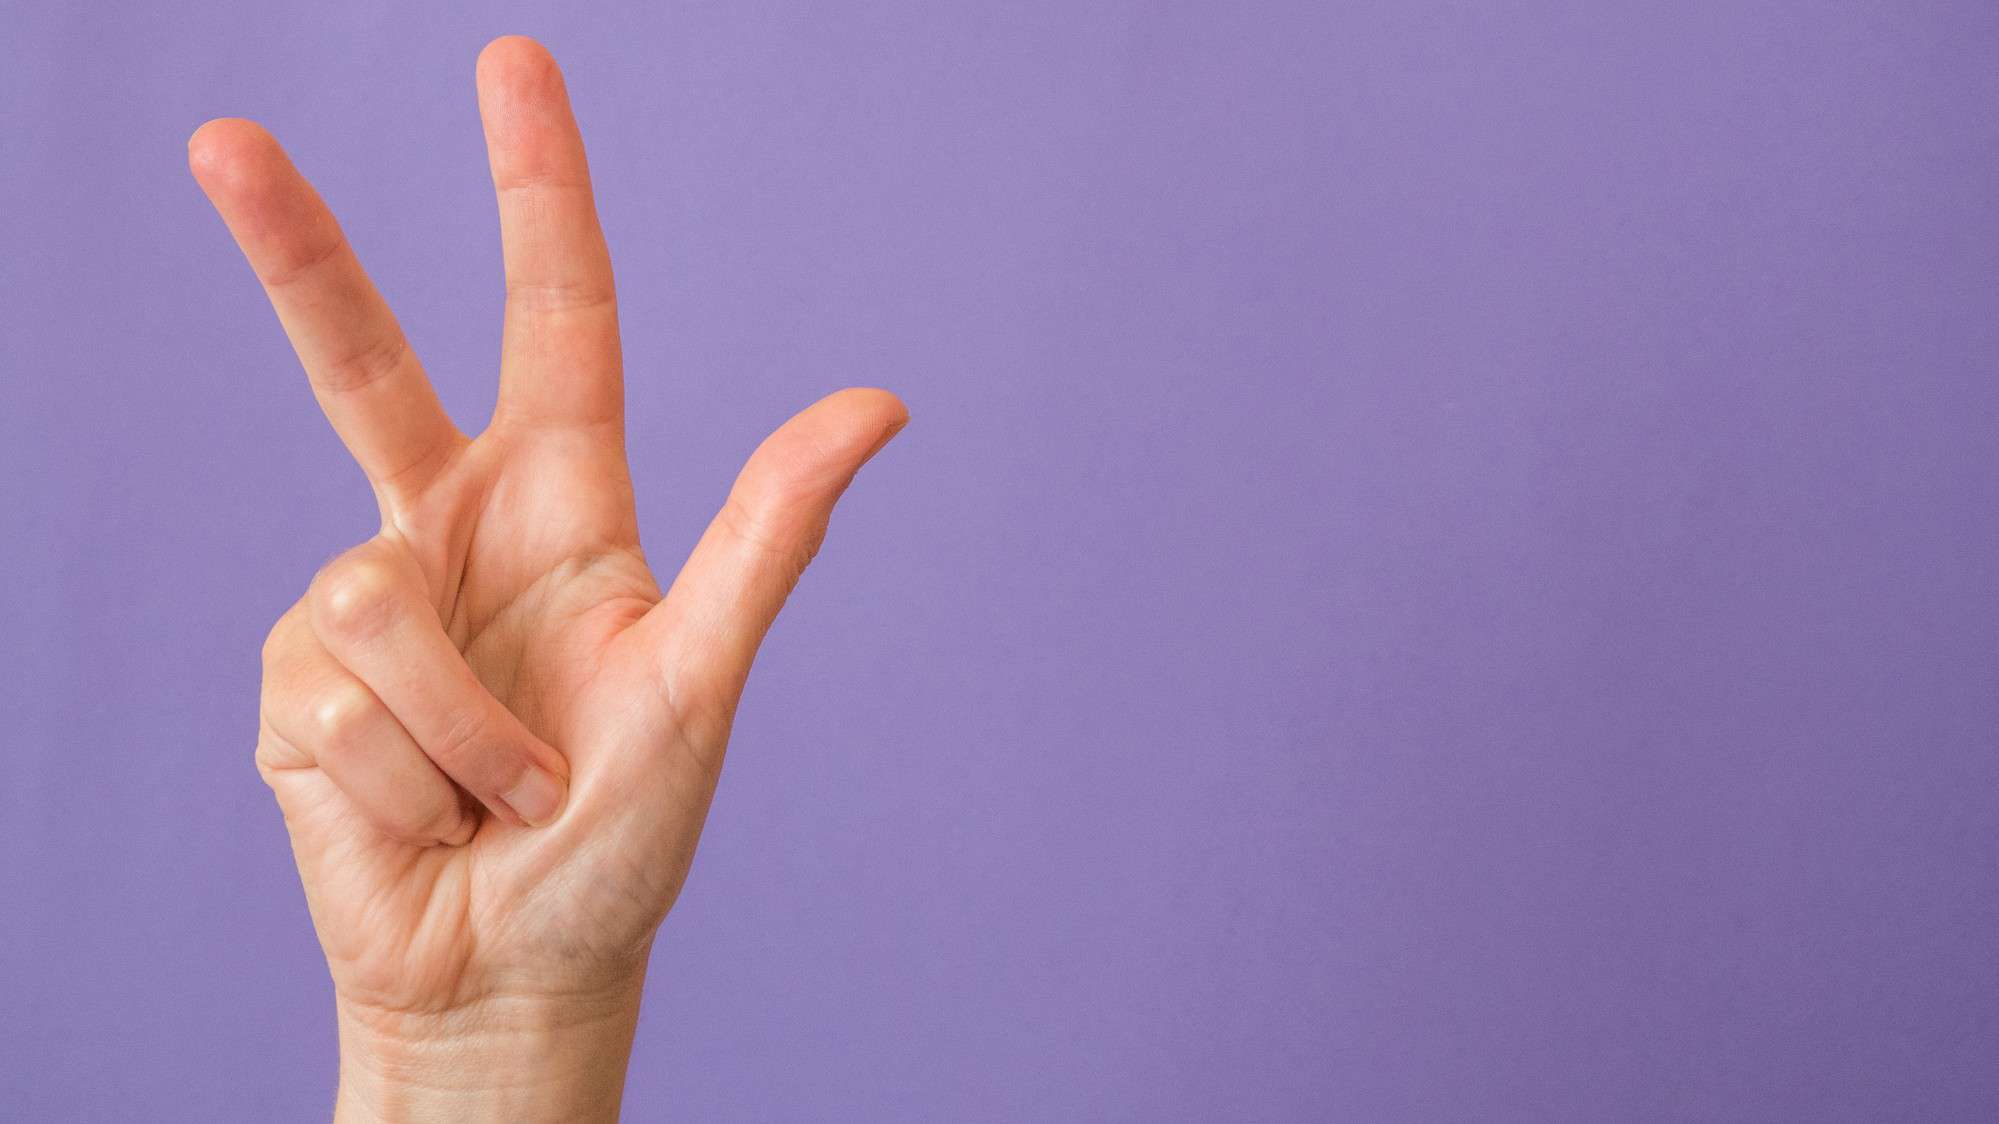 3 reasons for asx 200 share price rise represented by hand holding up 3 fingers